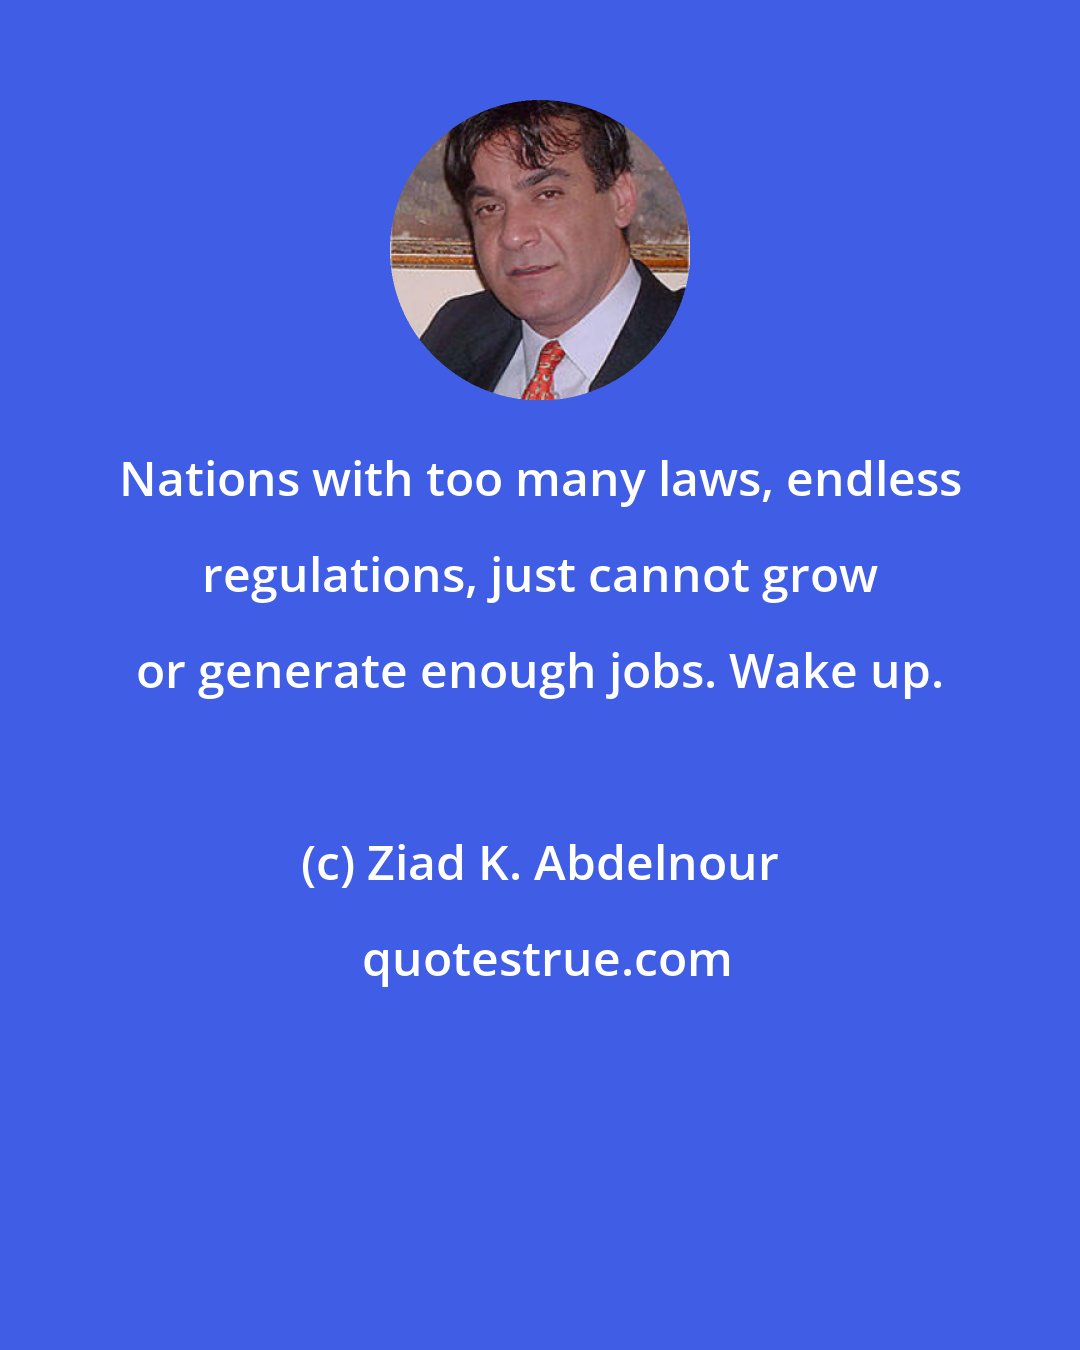 Ziad K. Abdelnour: Nations with too many laws, endless regulations, just cannot grow or generate enough jobs. Wake up.